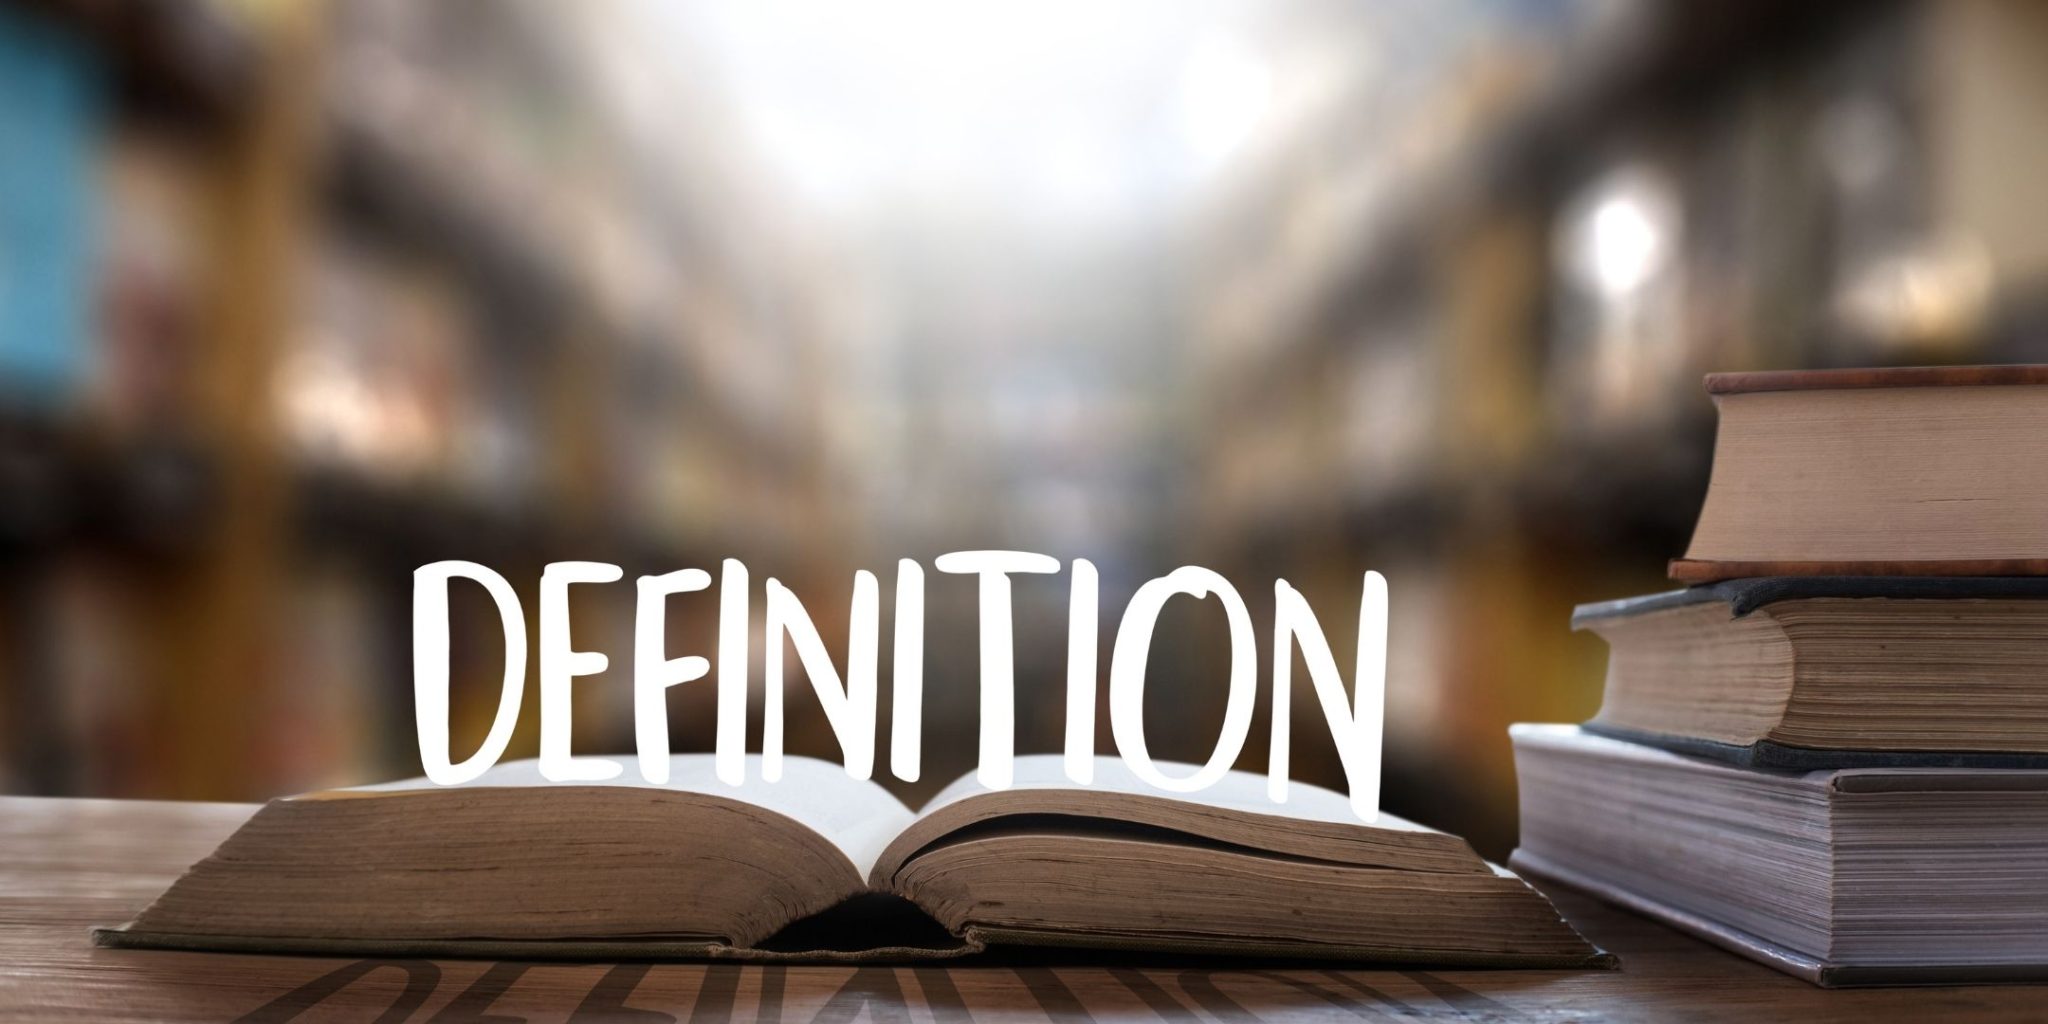 Books showing the need for definition